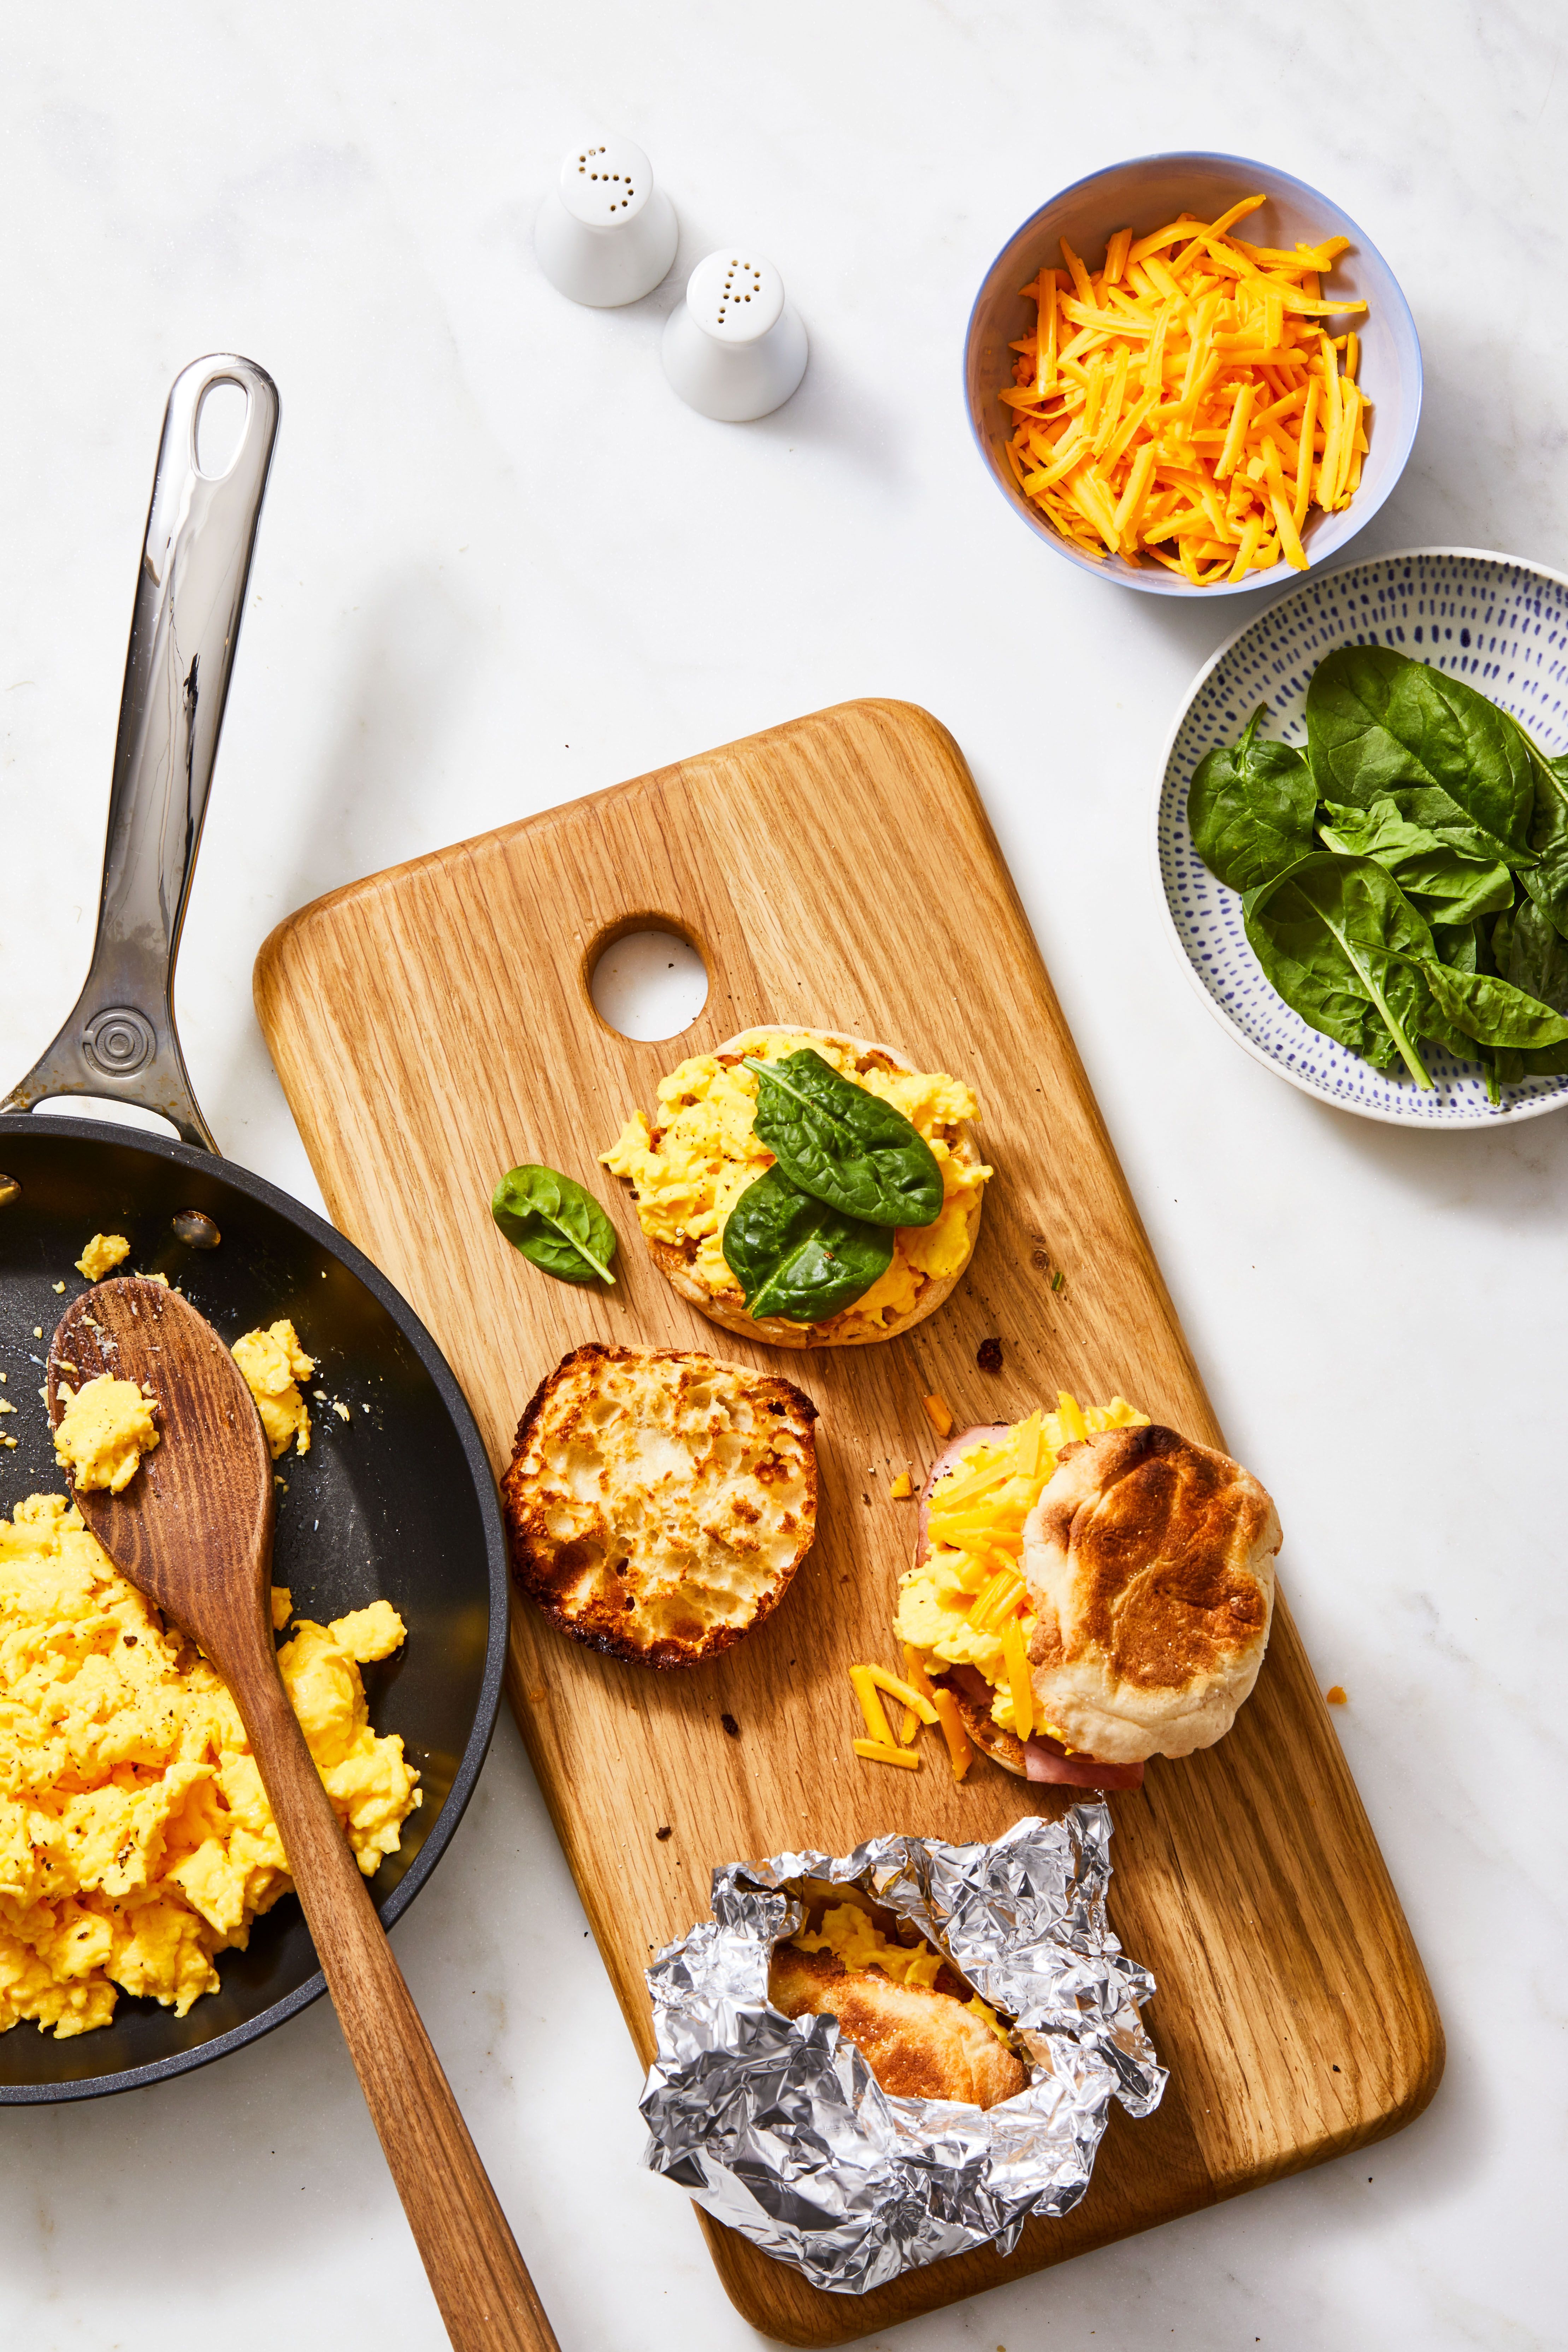 UNCONVENTIONAL BRUNCH RECIPES TO WHIP UP THIS FATHER'S DAY